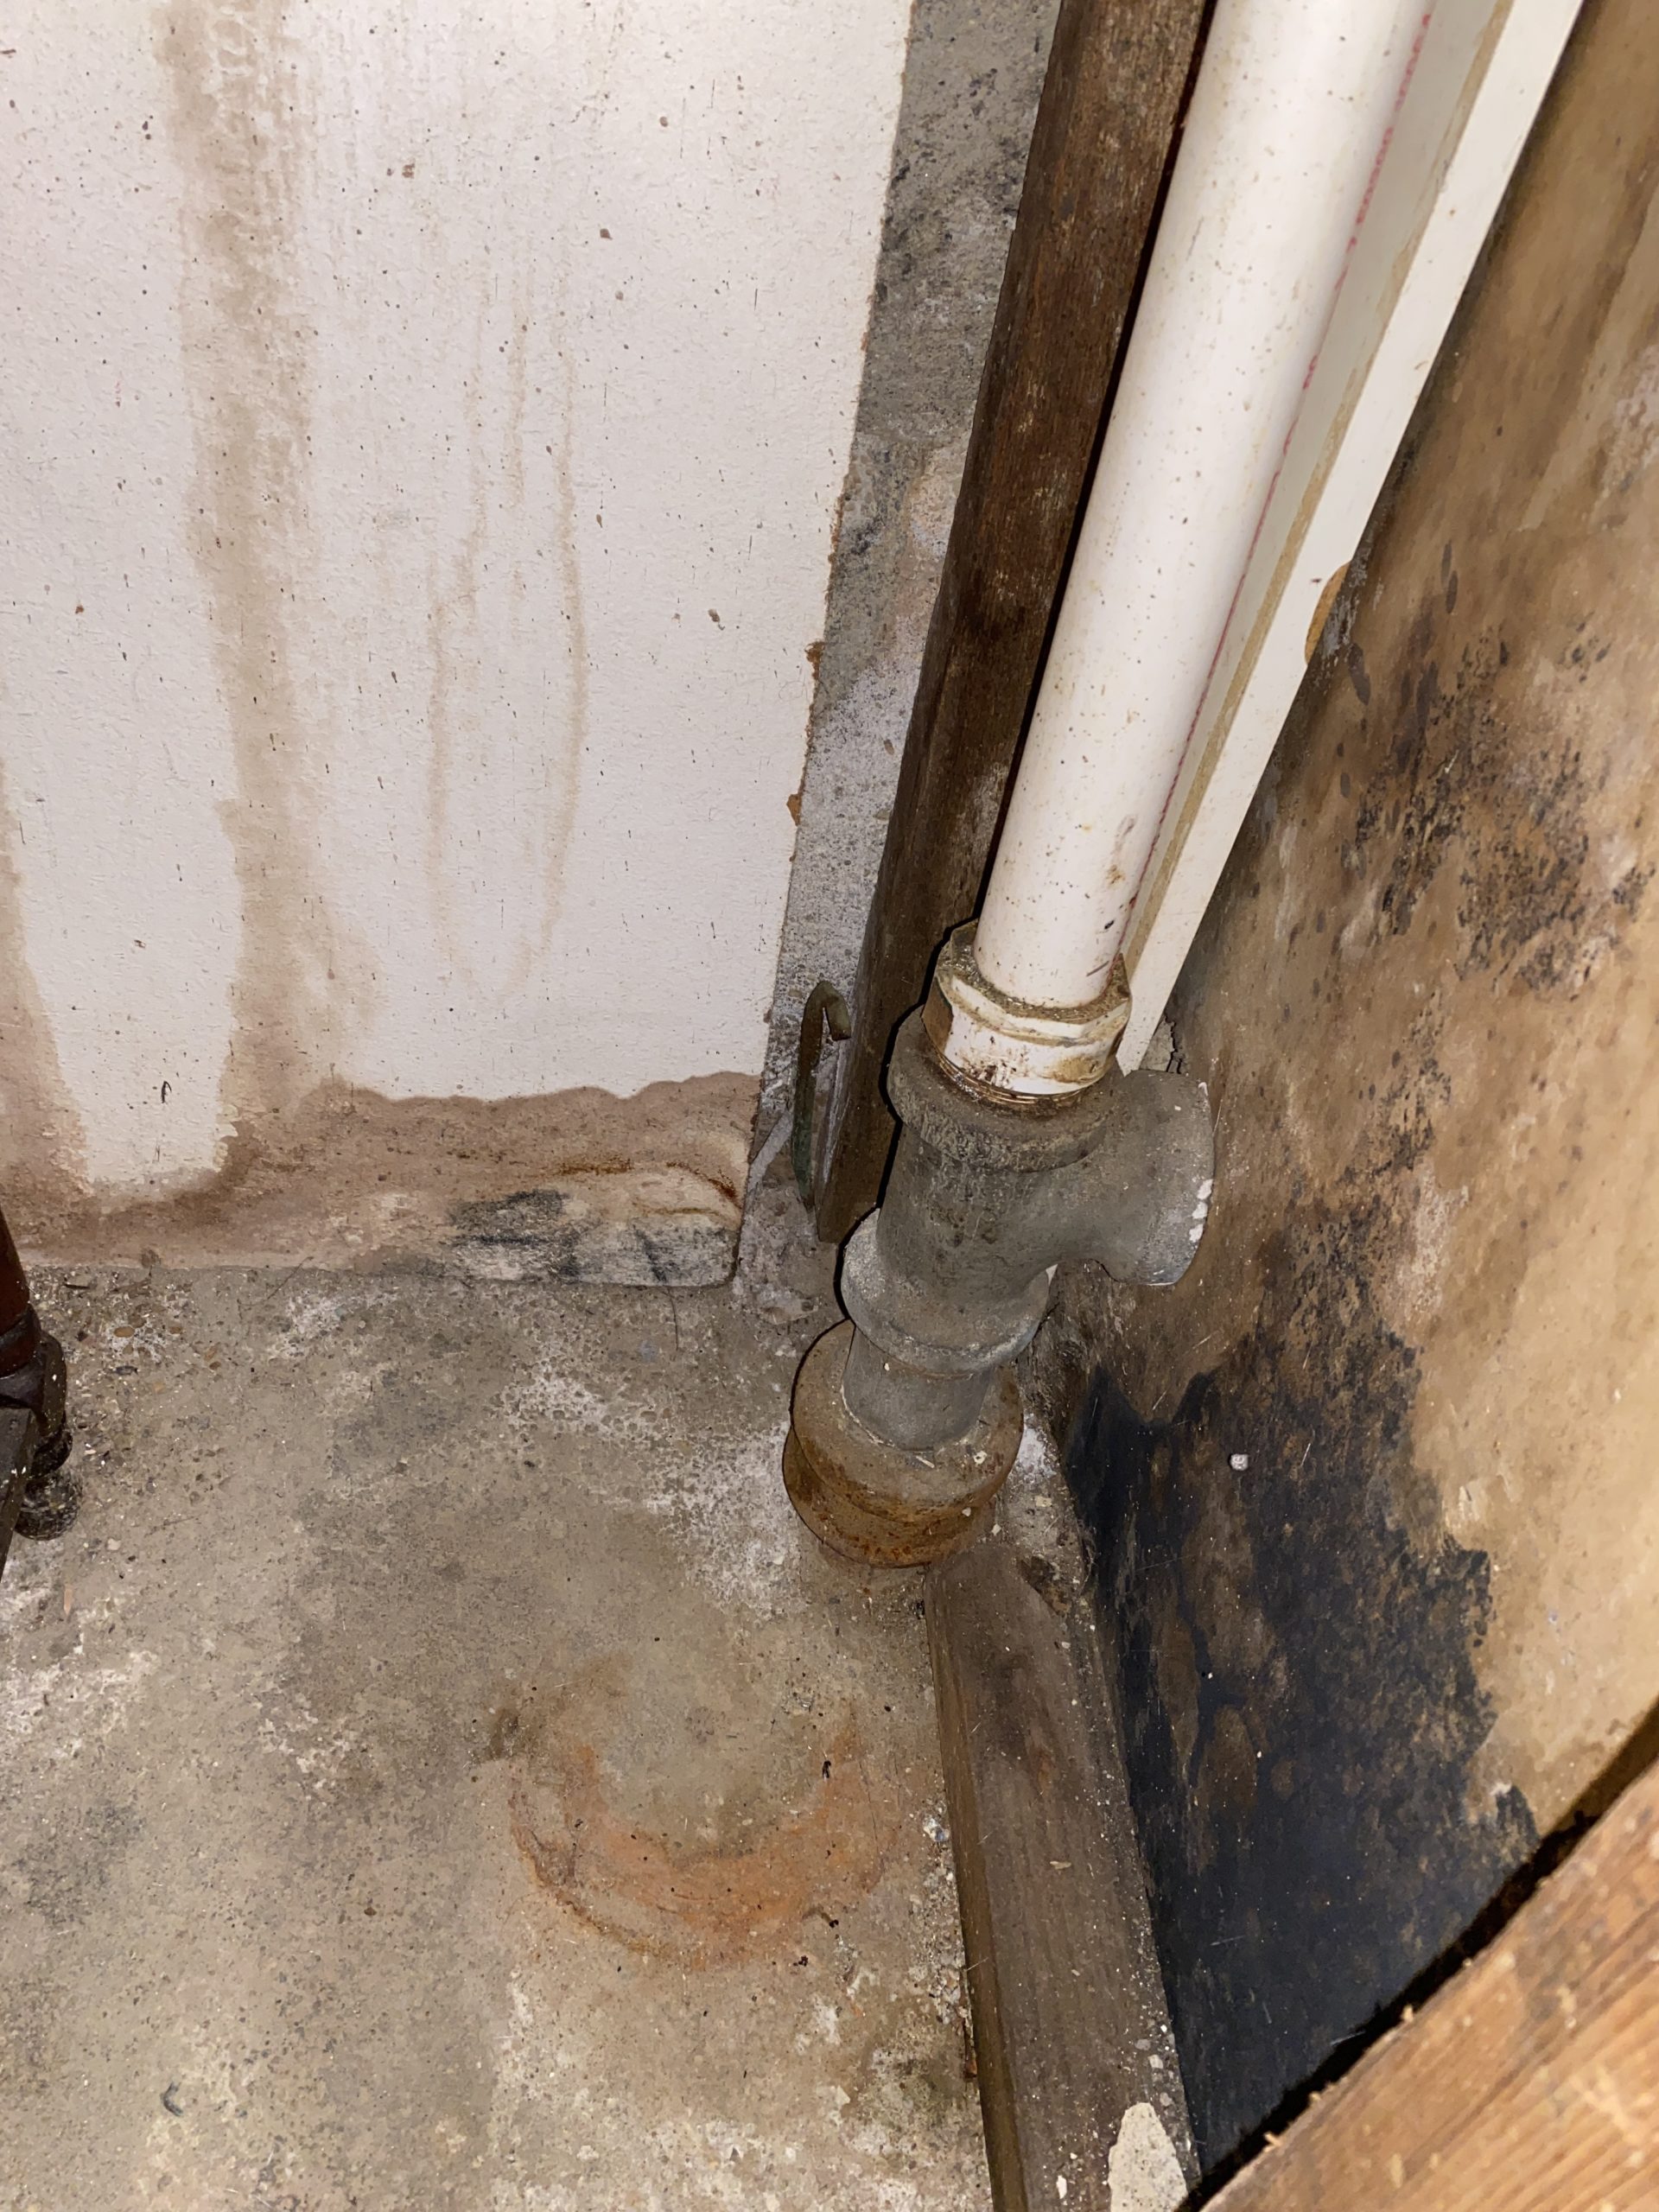 The common denominator in any mold infestation is moisture, according to Brad C. Slack, the founder of Mold Pro, Inc.